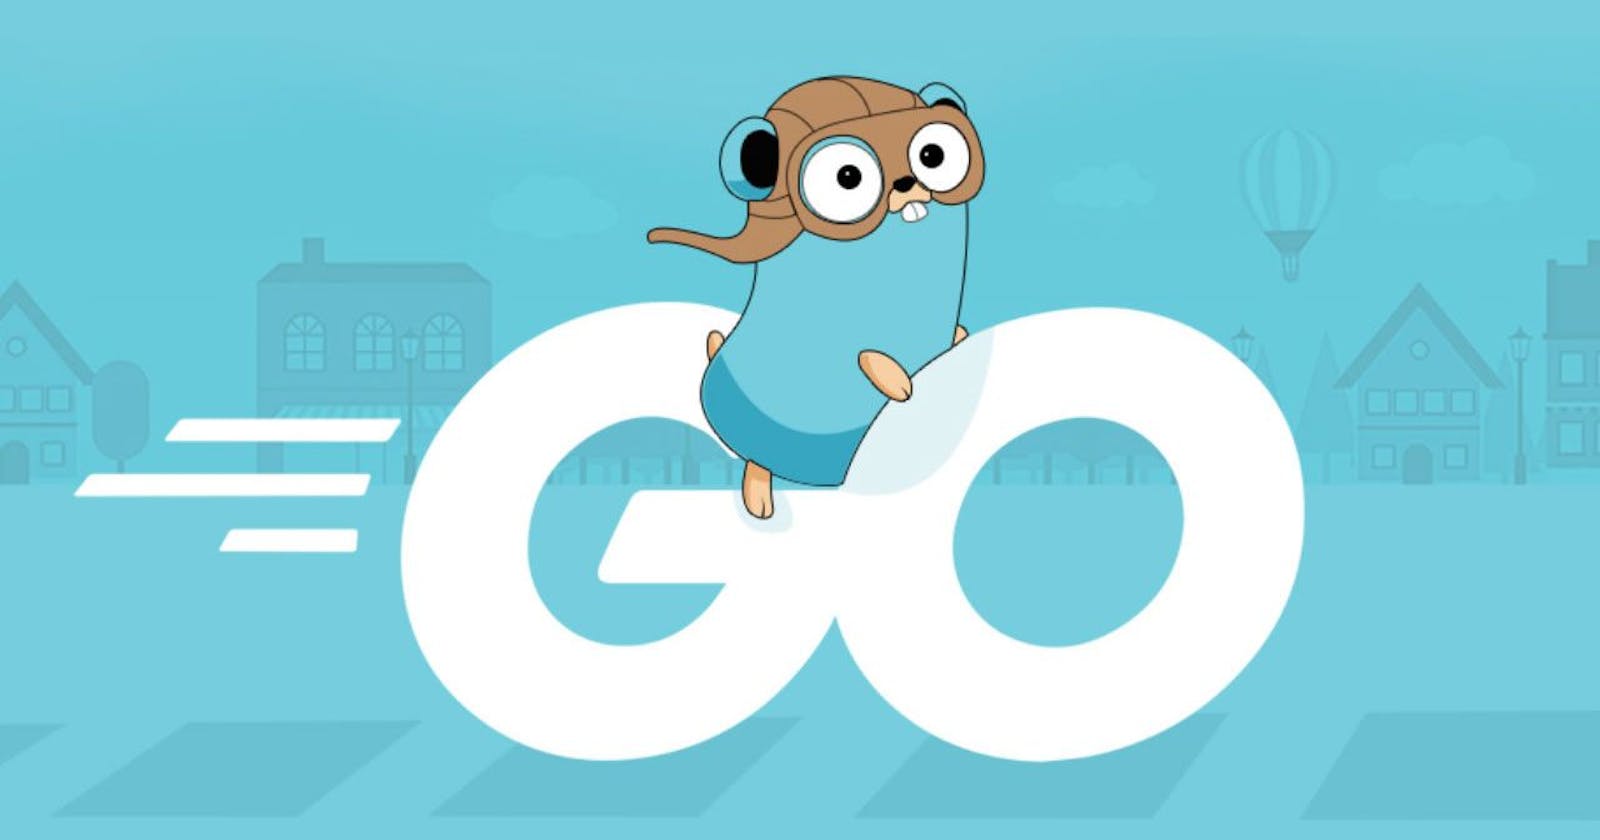 "Exploring the World of Go (Golang): A Beginner-Friendly Guide"